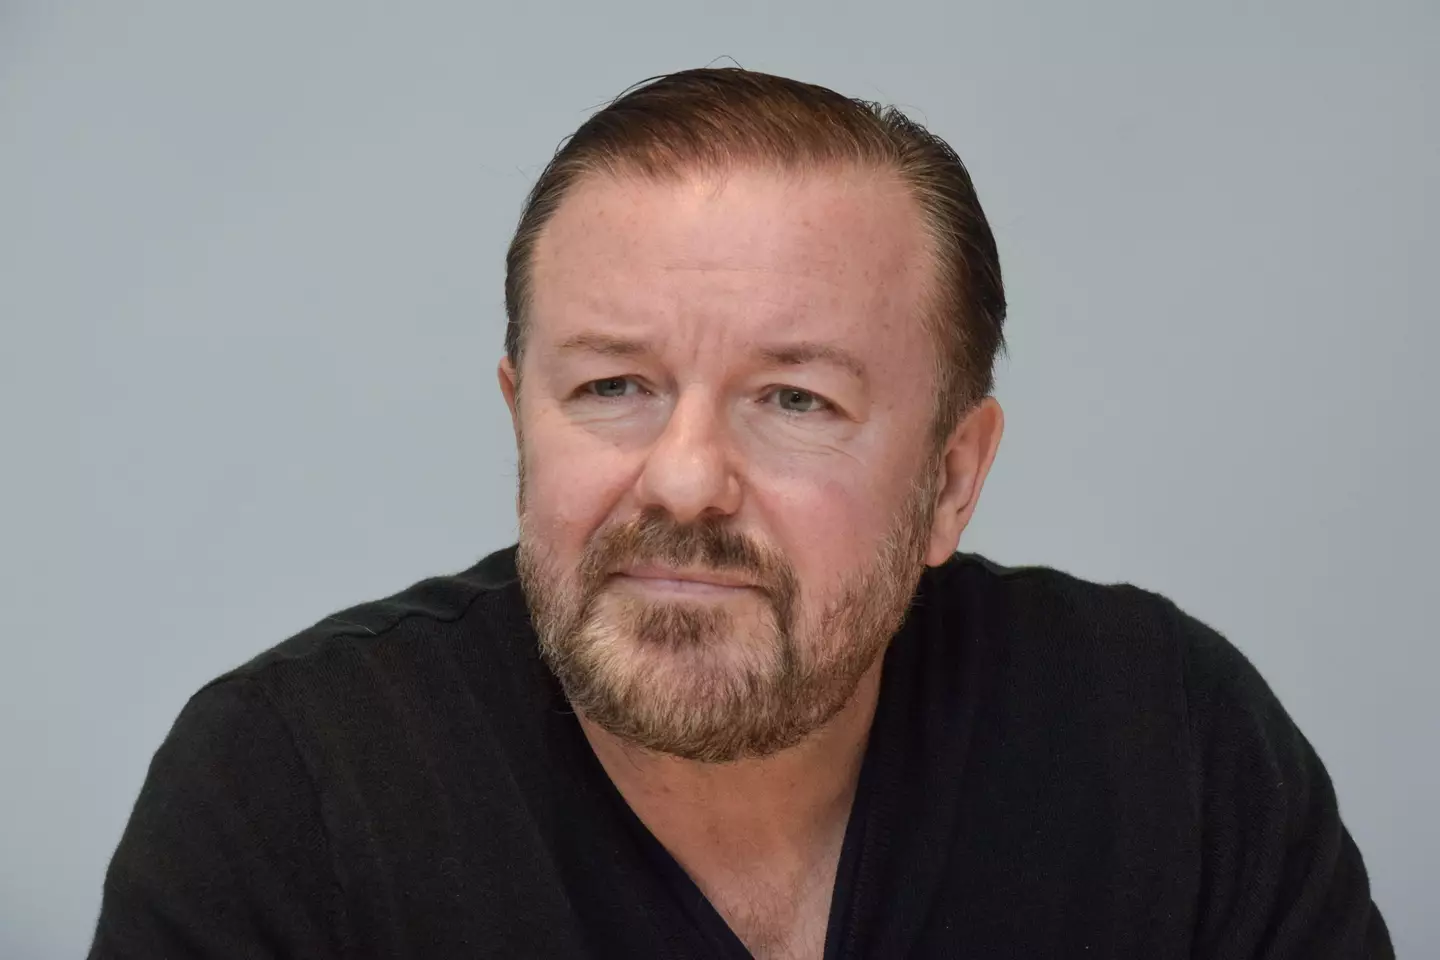 Gervais has insisted he personally wouldn't have made a joke about Jada Pinkett Smith's alopecia.